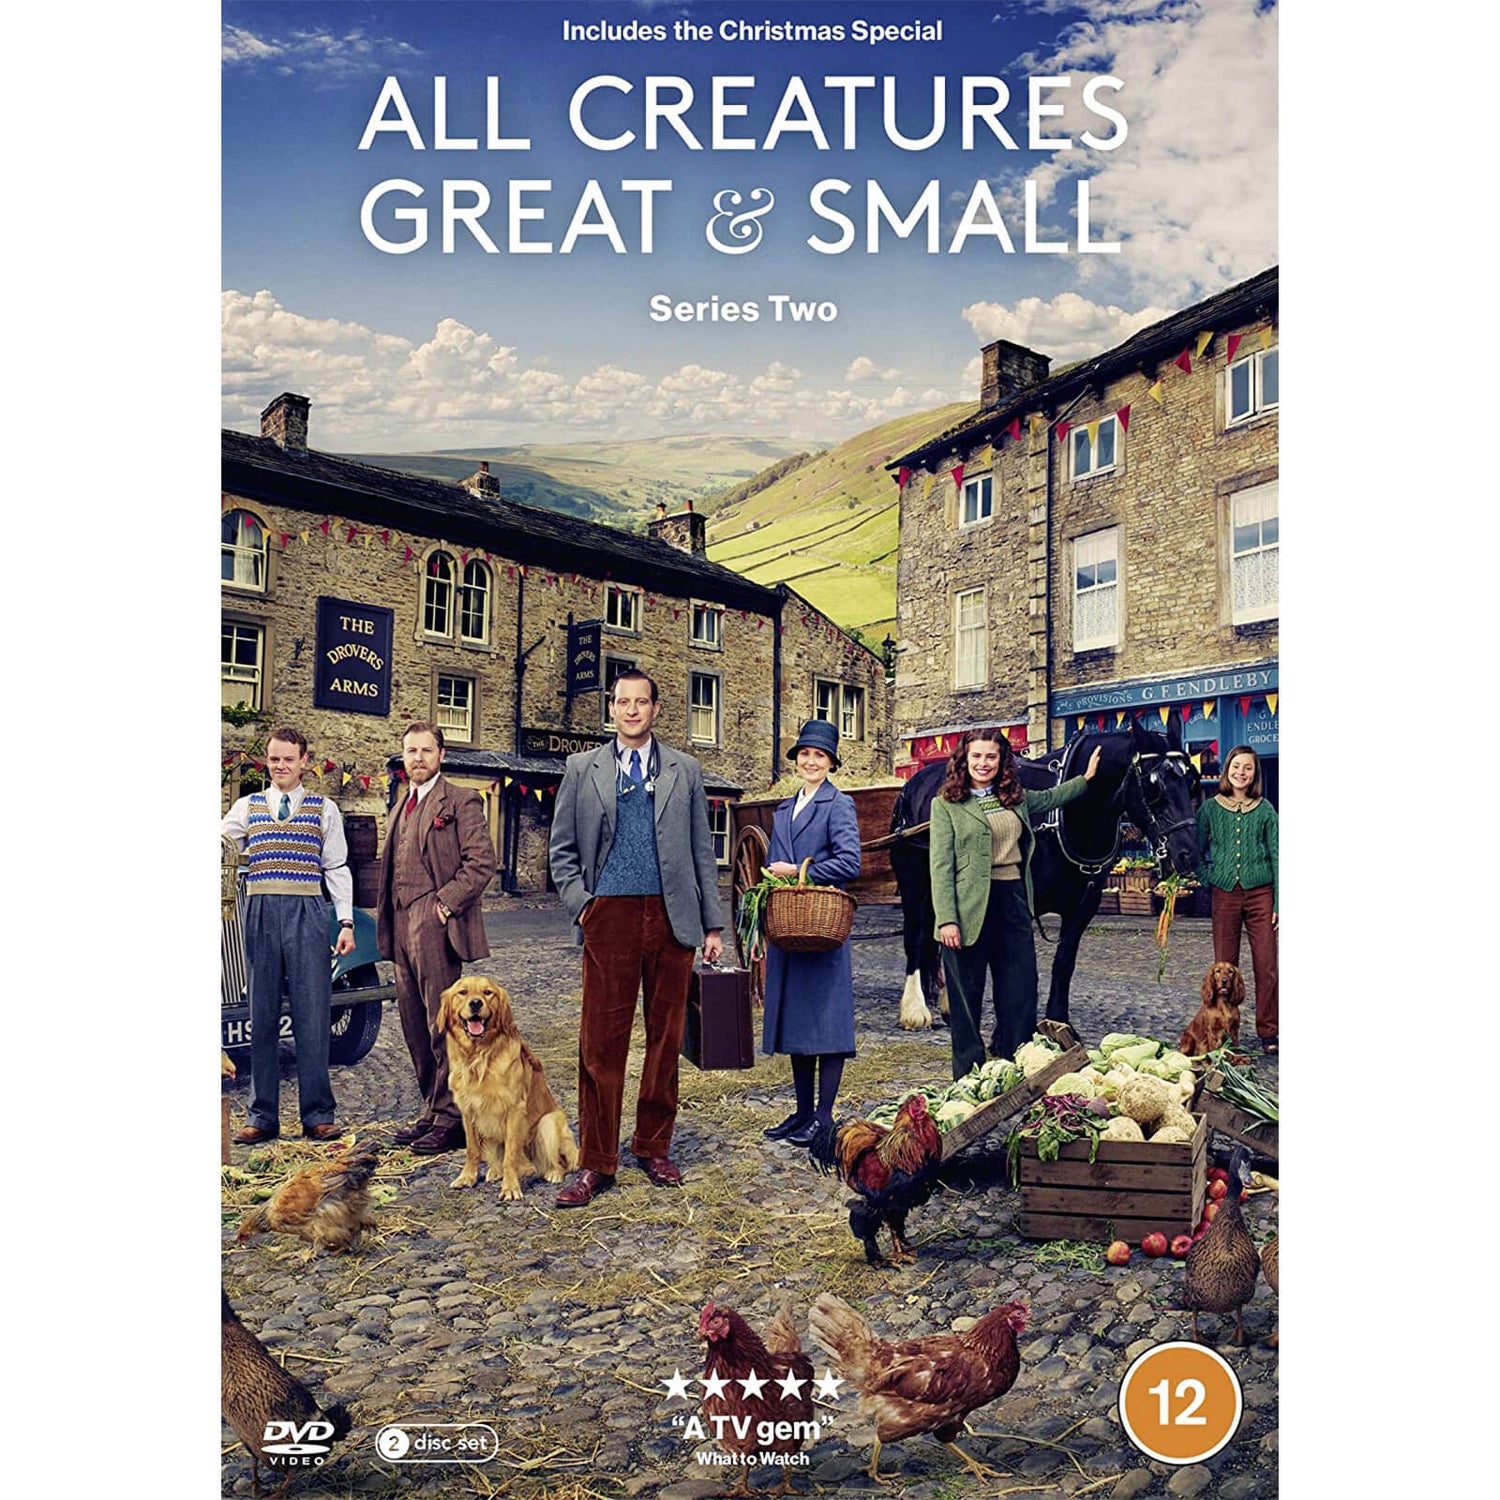 All Creatures Great & Small: Series 2